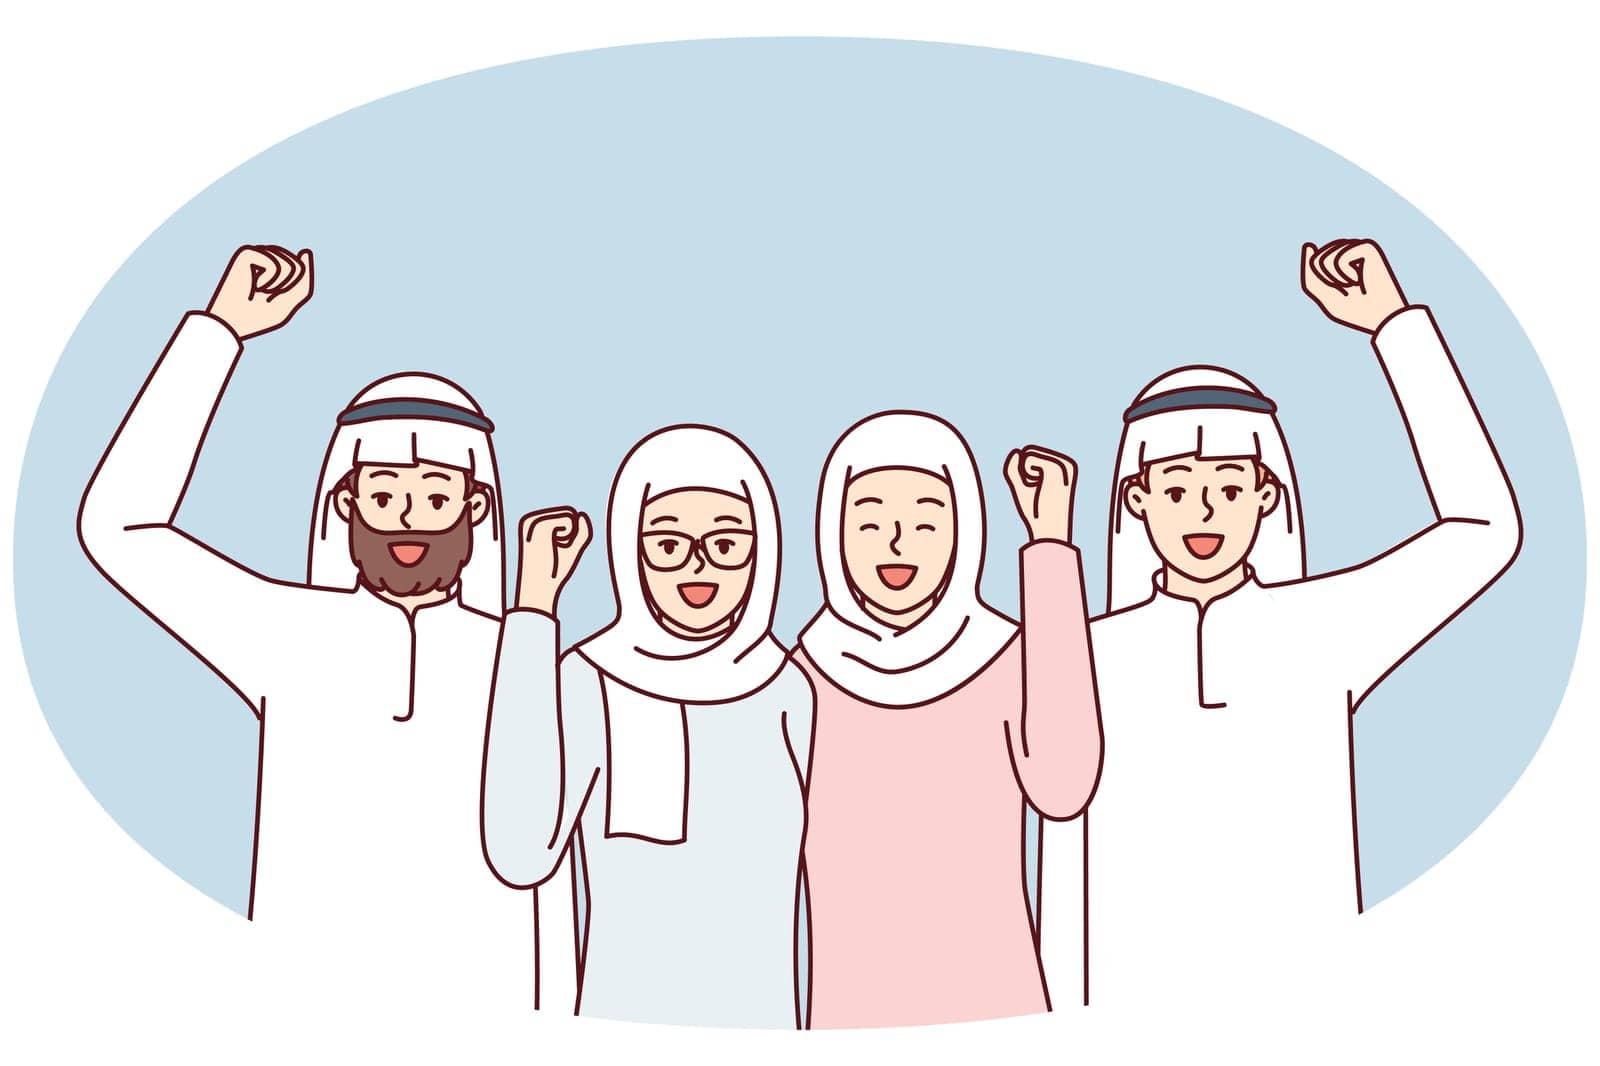 Team of people in arabic clothes make victory gestures rejoice at startup success. Modern men and women in Islamic clothing and headdresses raise their fist up with smile